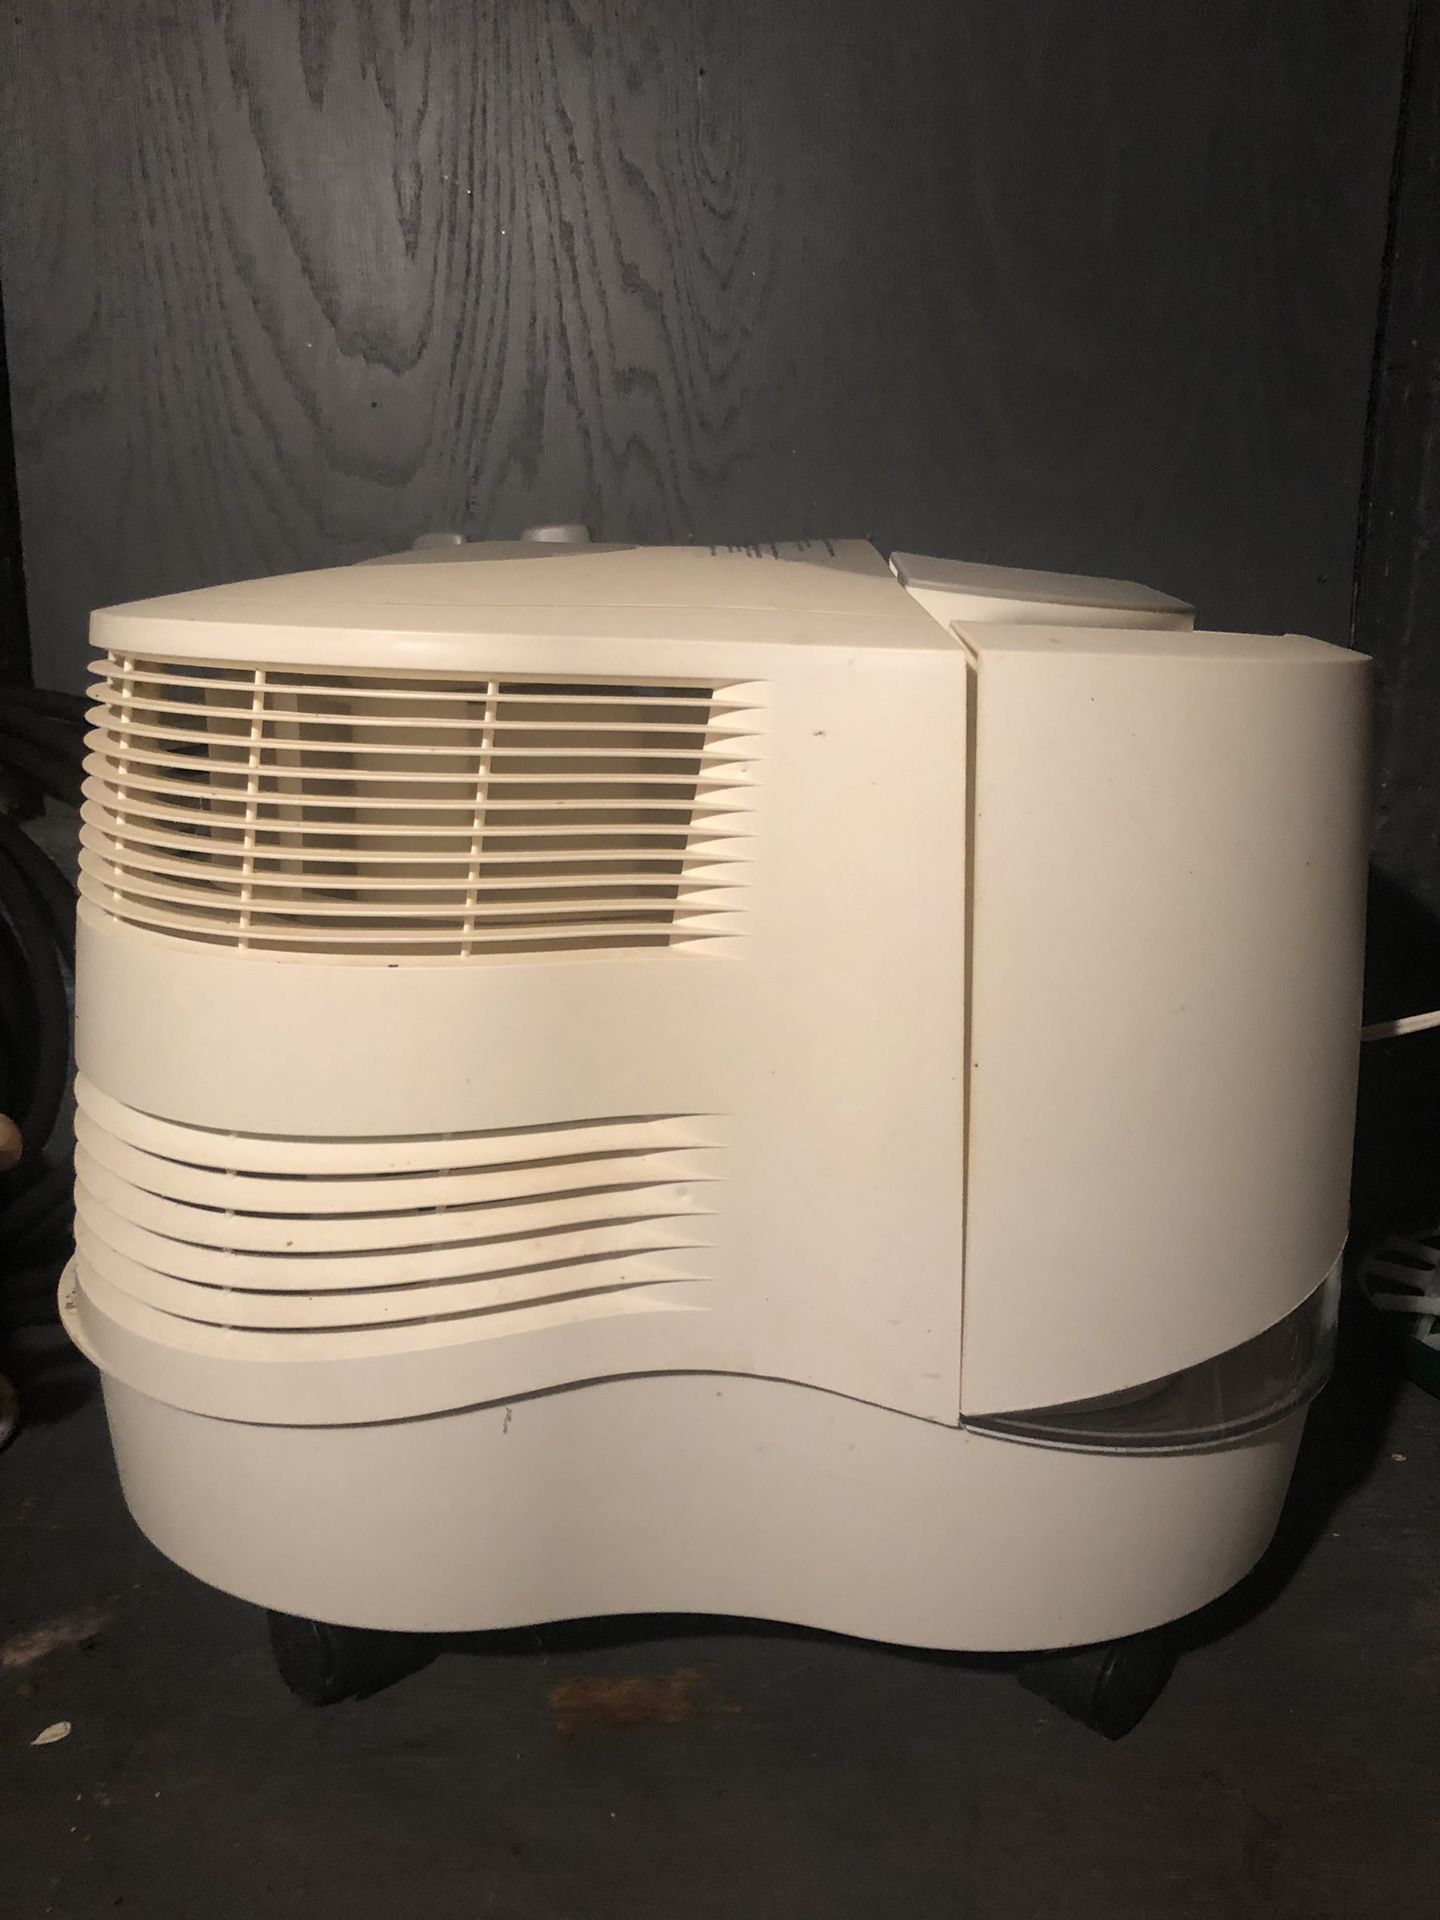 Honeywell quiet care humidifier 2 units only used 1 time